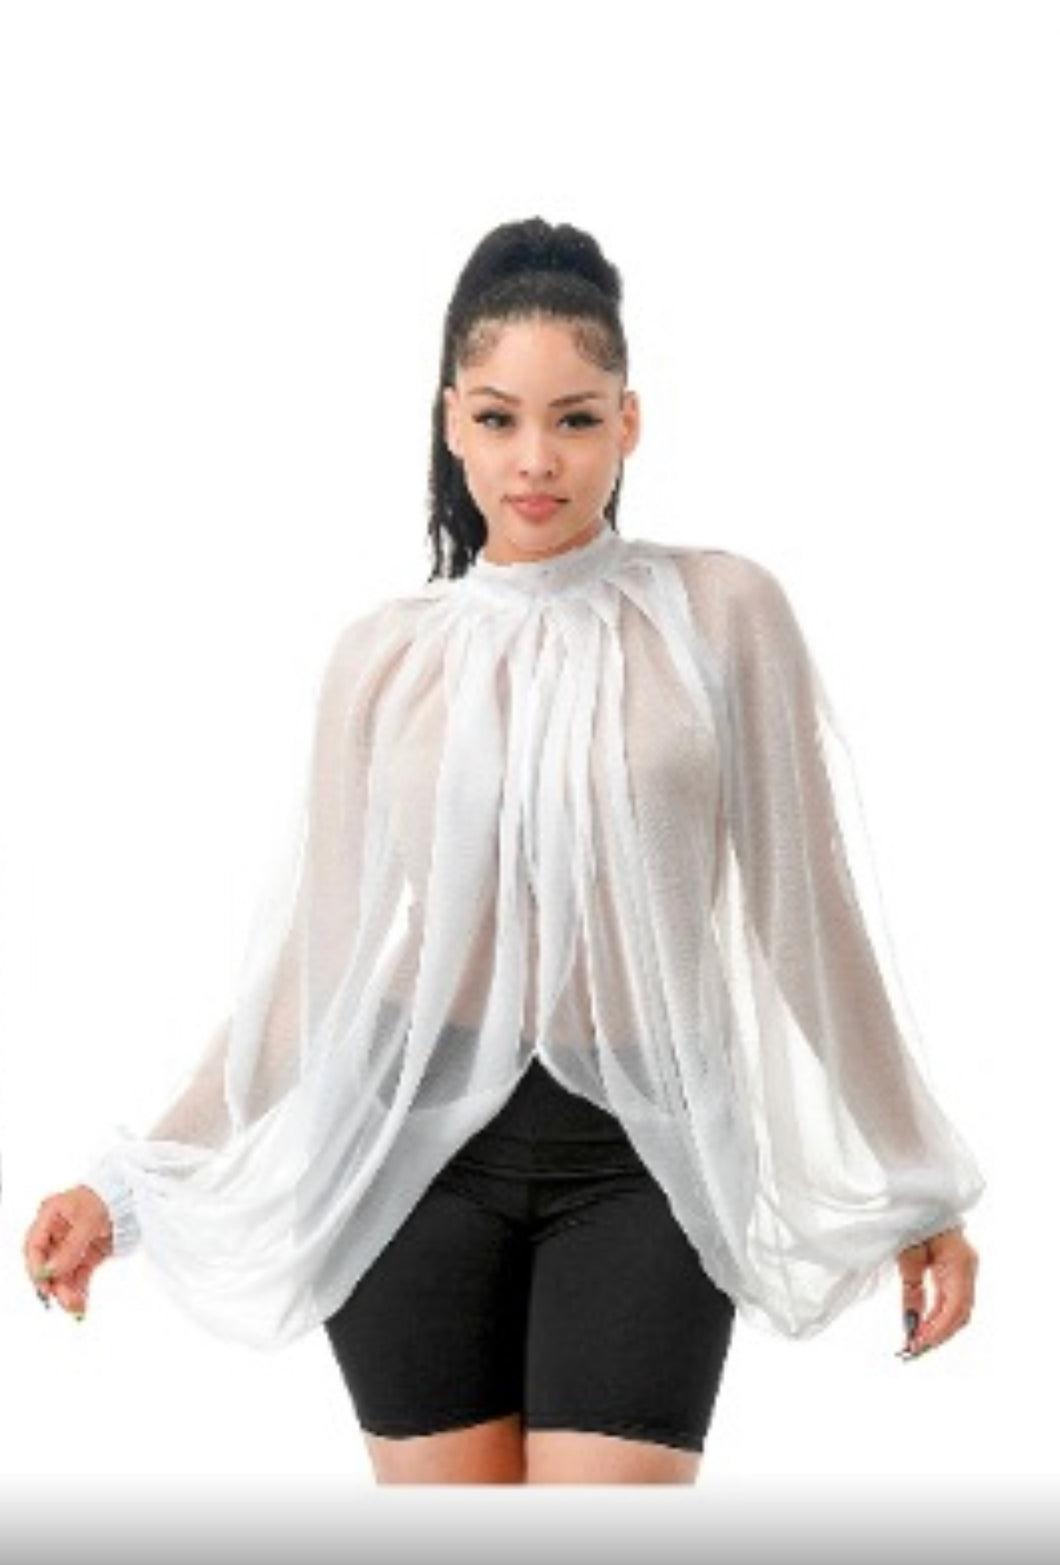 The patty sleeve top